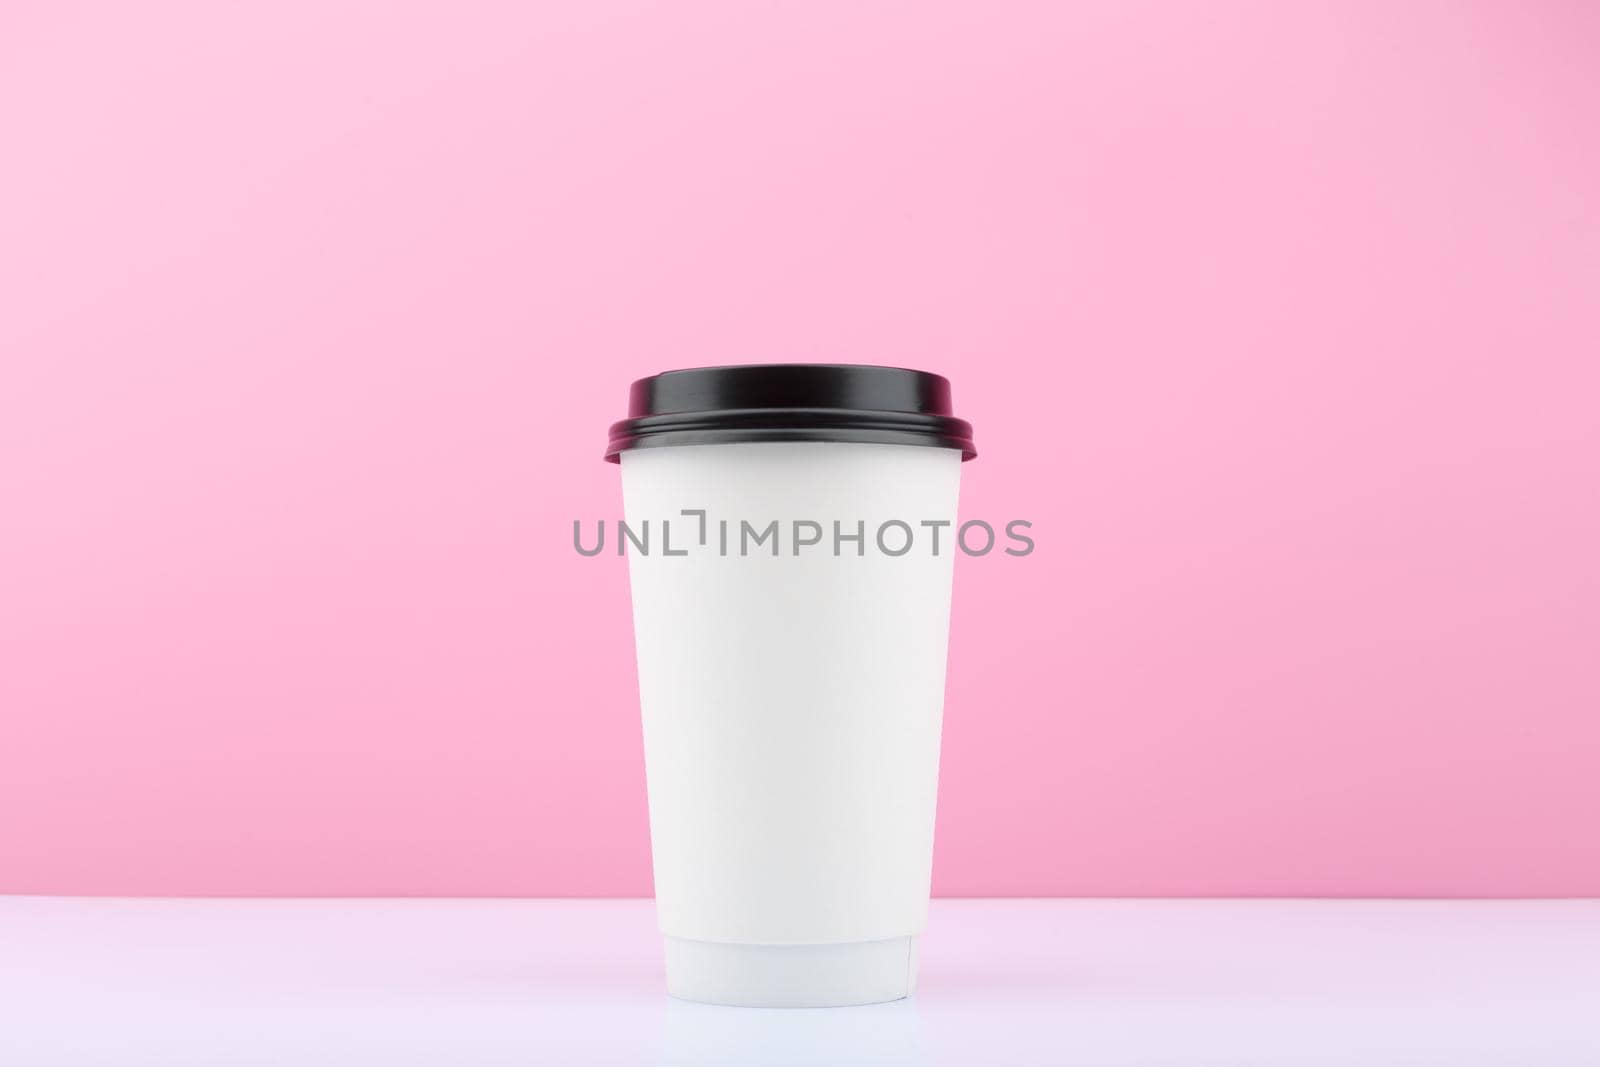 White tall disposable cup for tea or coffee on white table against bright purple background with copy space. Concept of disposable cups and hot drinks